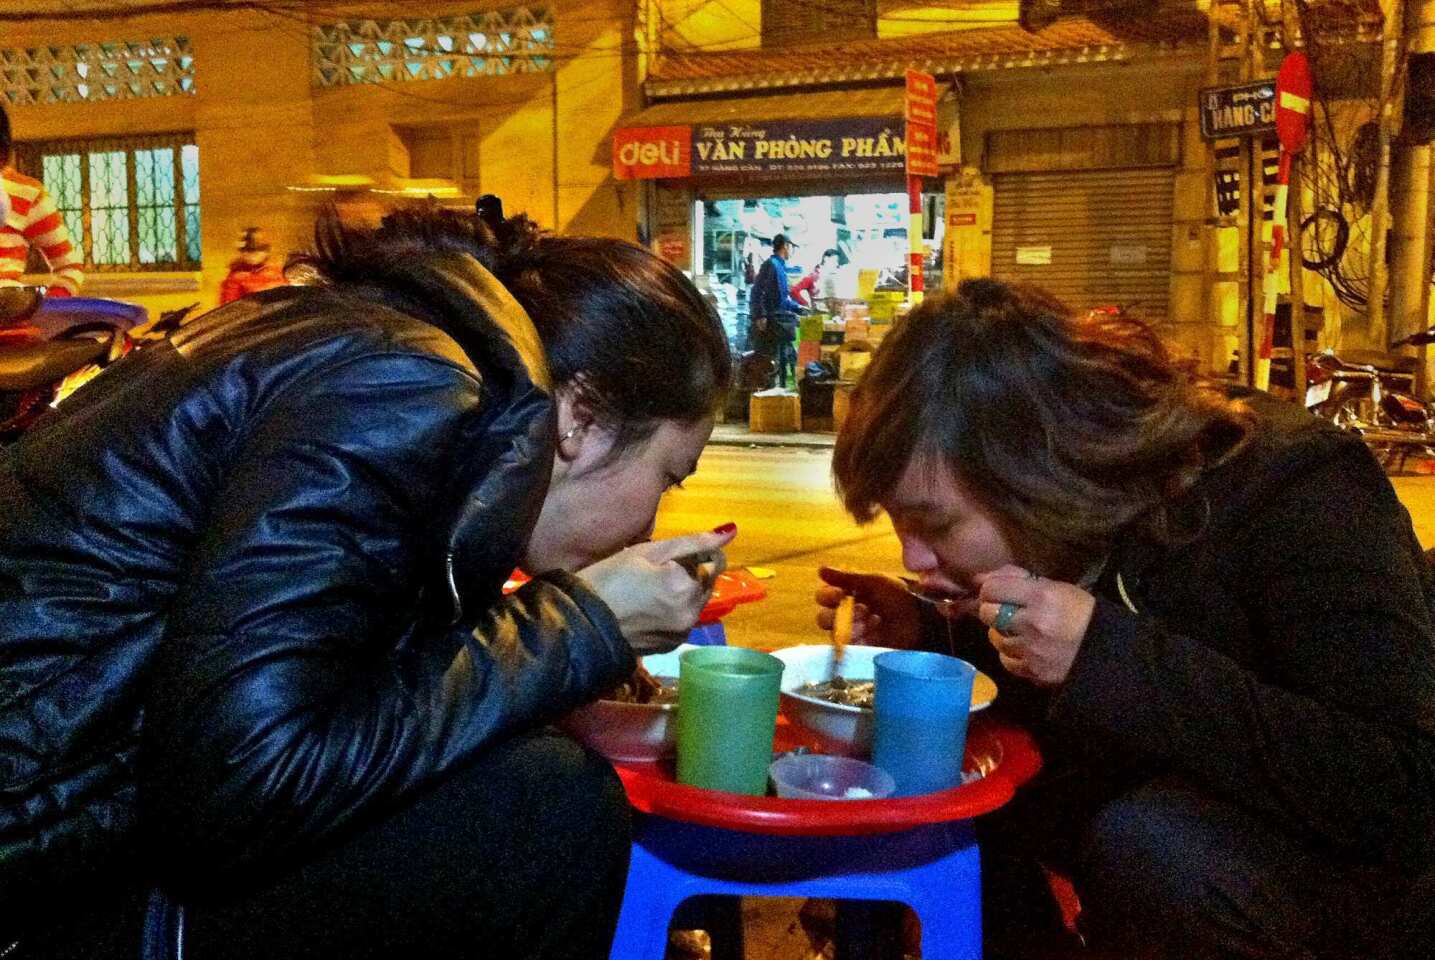 Friends enjoy chicken soup made with noodles and served with liver chunks at a street stall in Hanoi's Old Quarter.